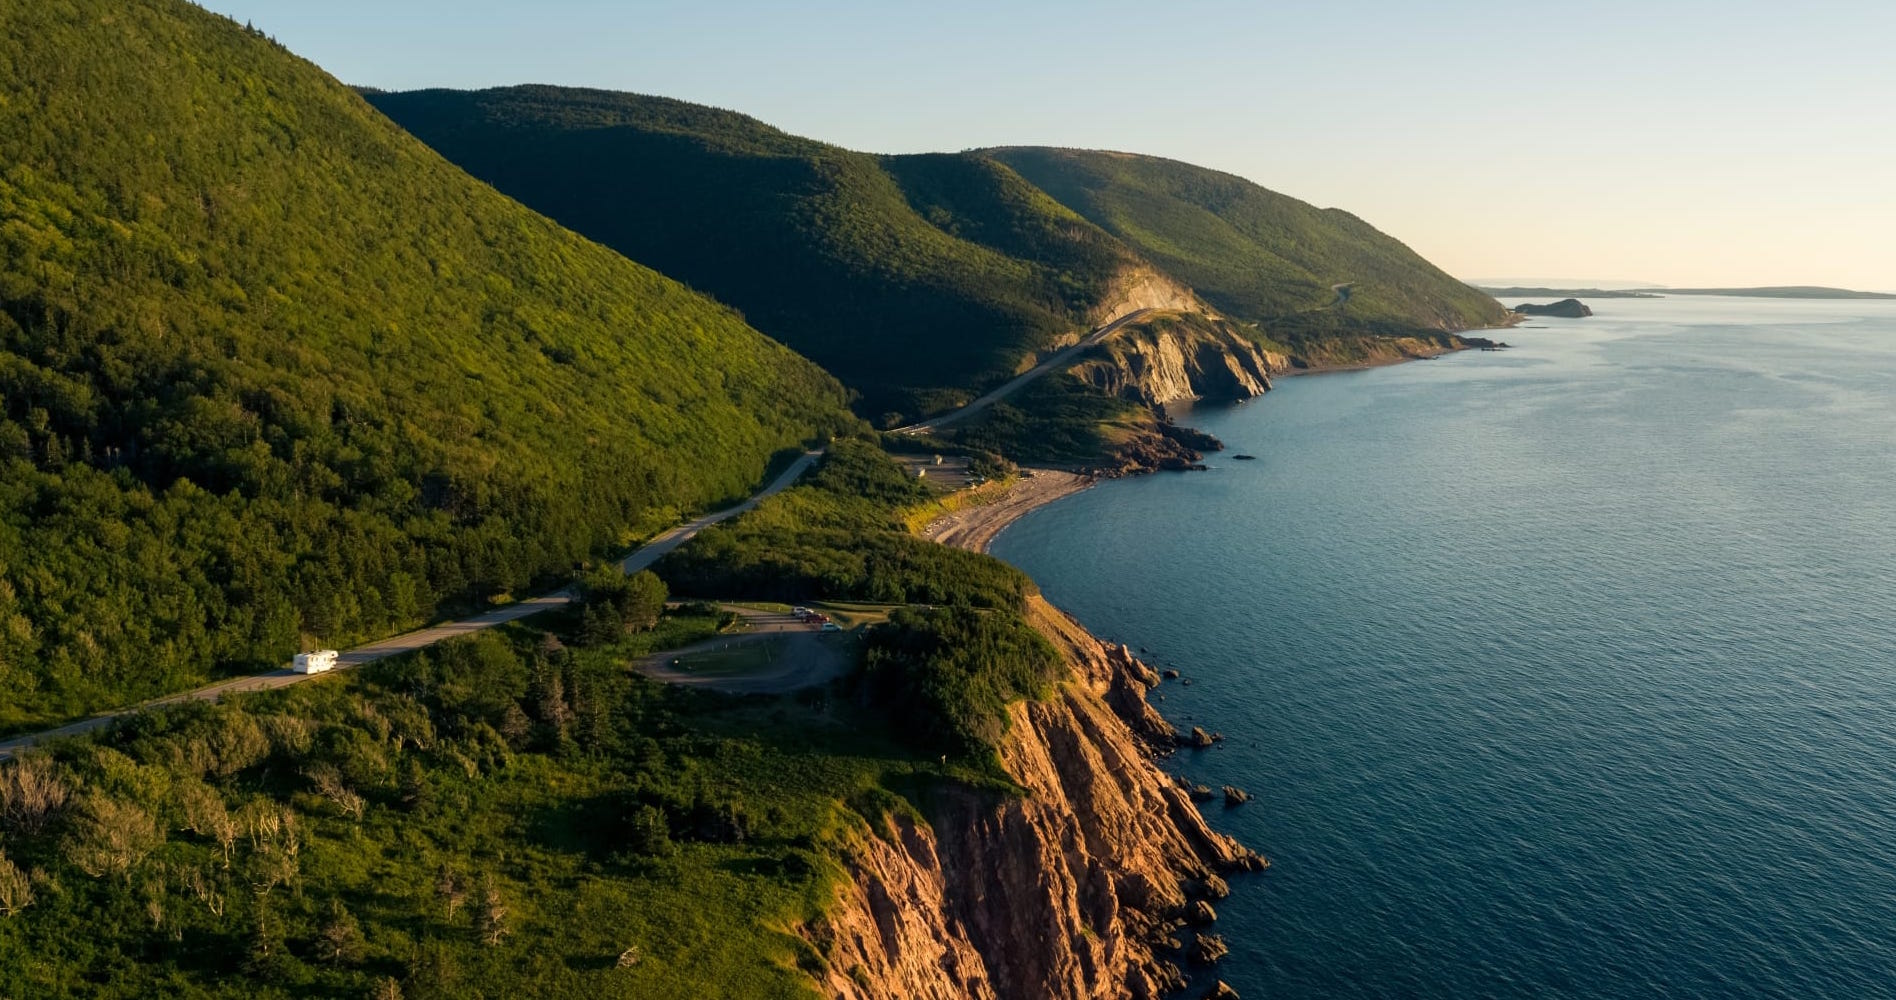 A Photo taken while on an RV trip to Cape Breton Highlands National Park in Canada.